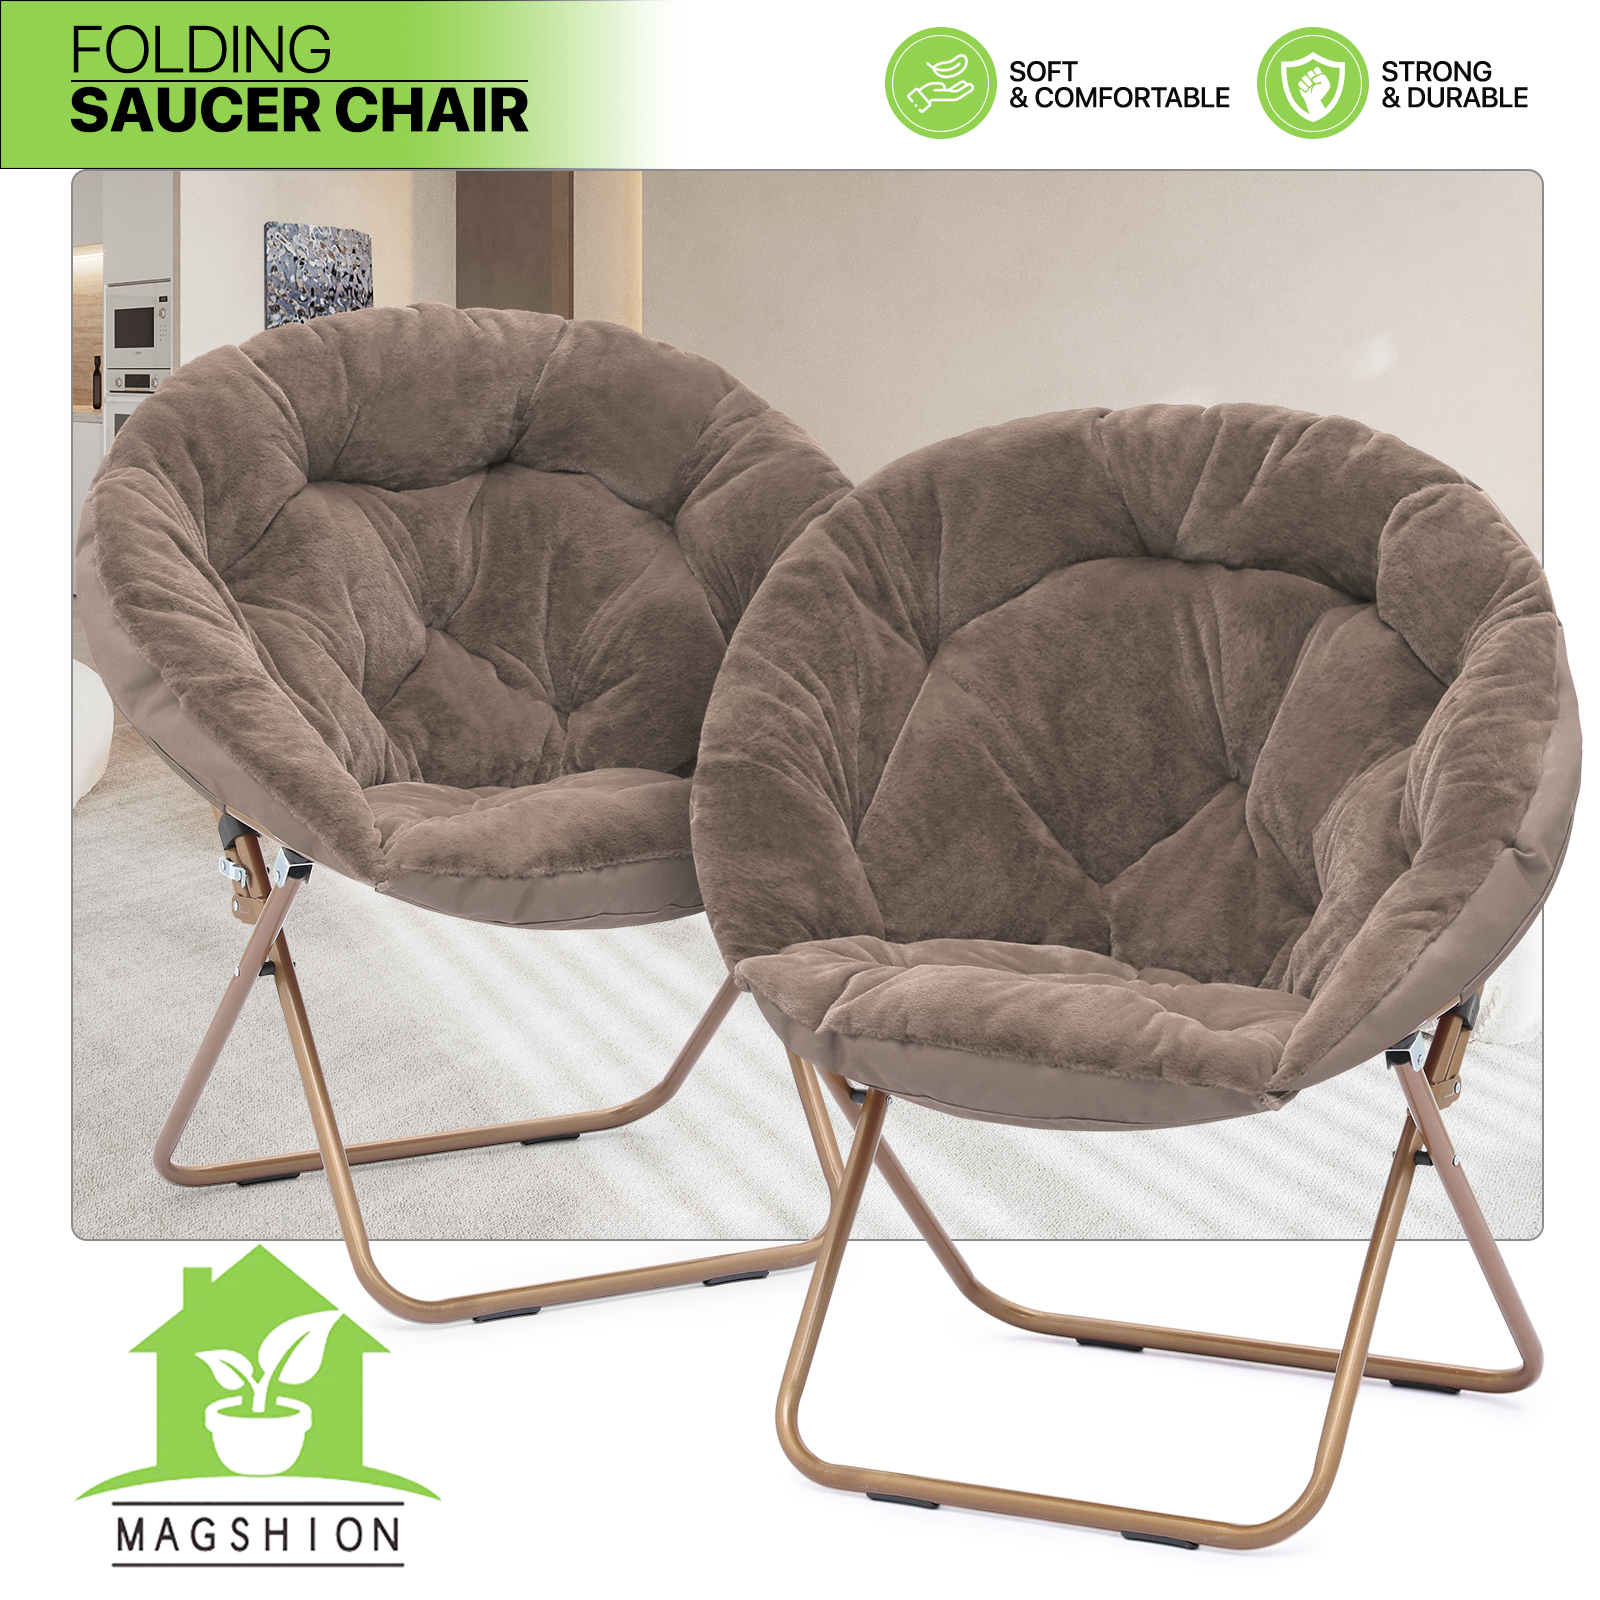 Magshion Set of 2 Comfy Saucer Chair, Foldable Faux Fur Lounge Chair for Bedroom Living Room, Cozy Moon Chair with Metal Frame for Adults, X-Large, Beige - image 2 of 10